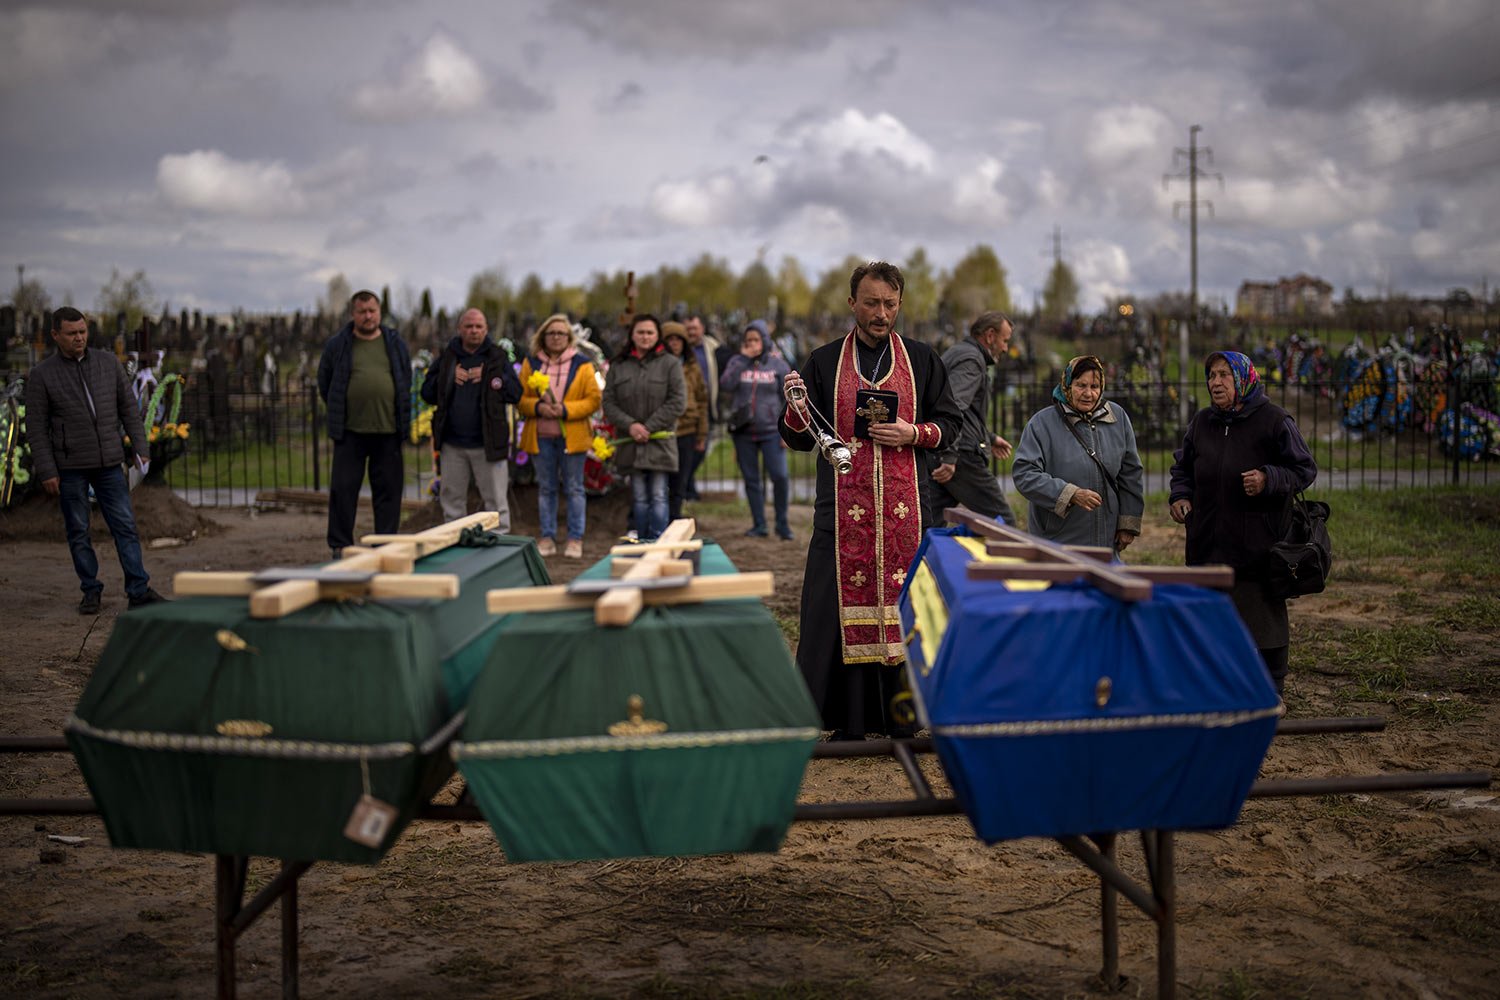  A priest blesses the remains of three people who died during the Russian invasion and were disinterred from temporary burial sites in Bucha, on the outskirts of Kyiv, Ukraine, Wednesday, April 27, 2022. (AP Photo/Emilio Morenatti) 